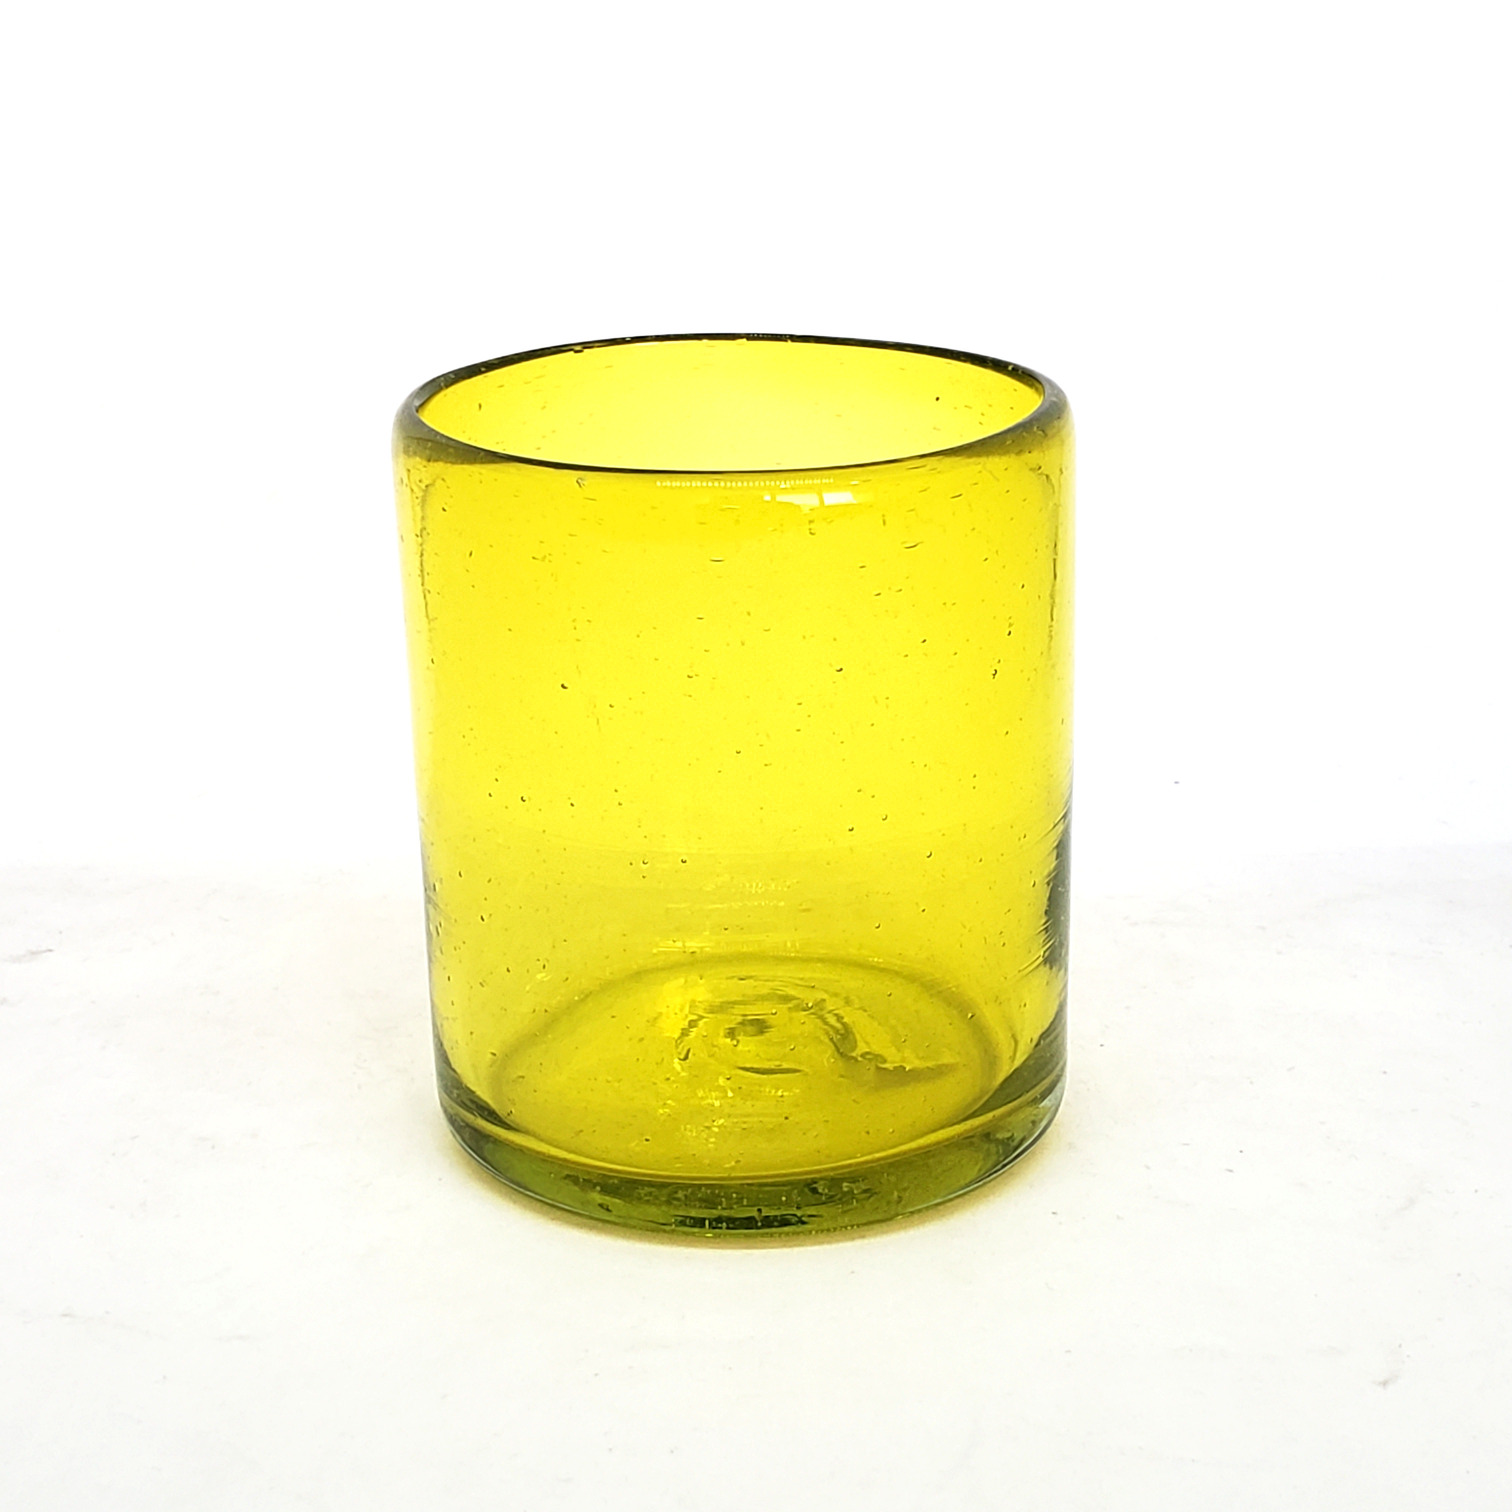 Colored Glassware / Solid Yellow 9 oz Short Tumblers (set of 6) / Enhance your favorite drink with these colorful handcrafted glasses.